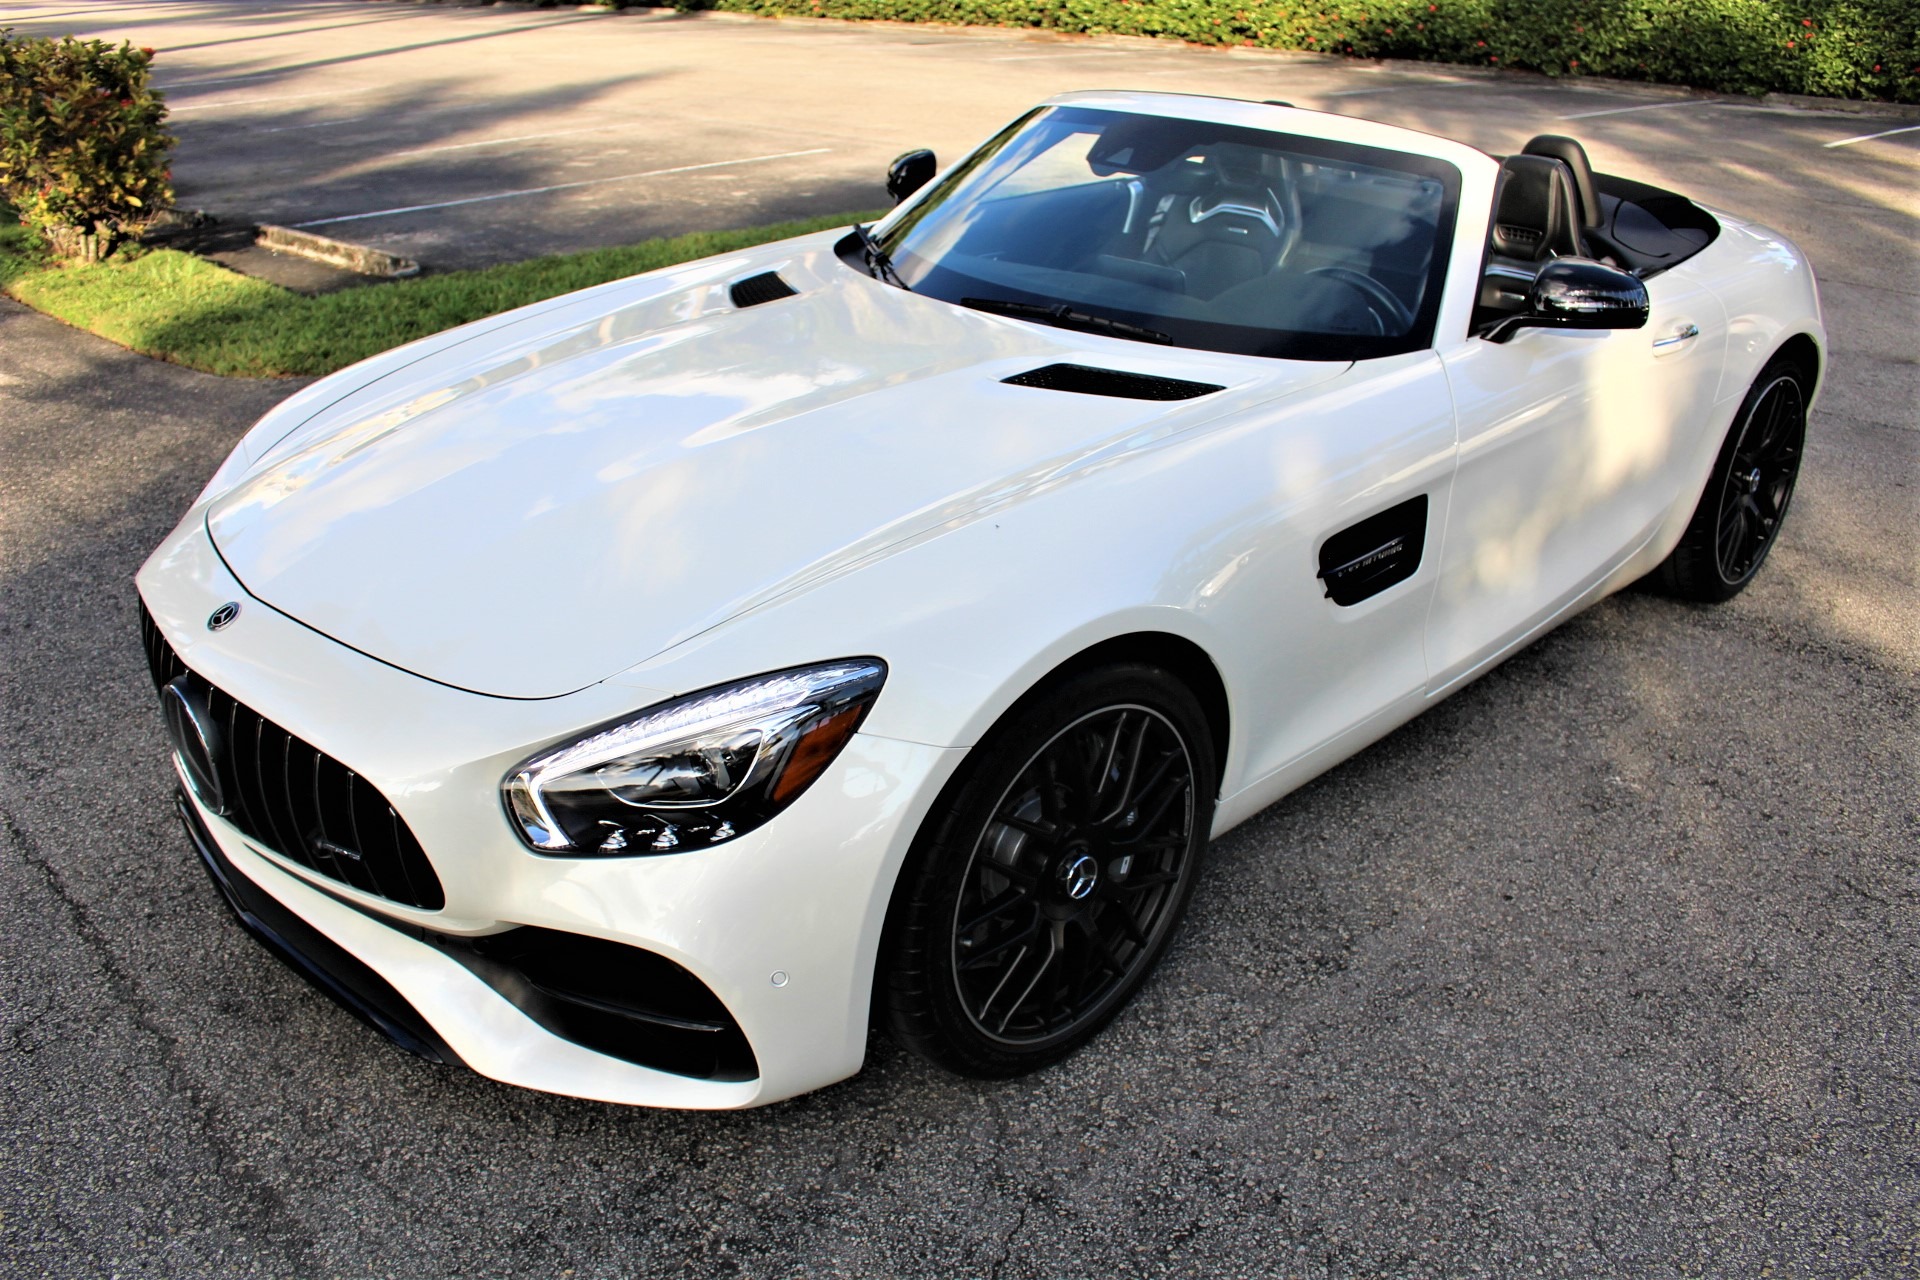 Used 2018 Mercedes-Benz AMG GT for sale Sold at The Gables Sports Cars in Miami FL 33146 4